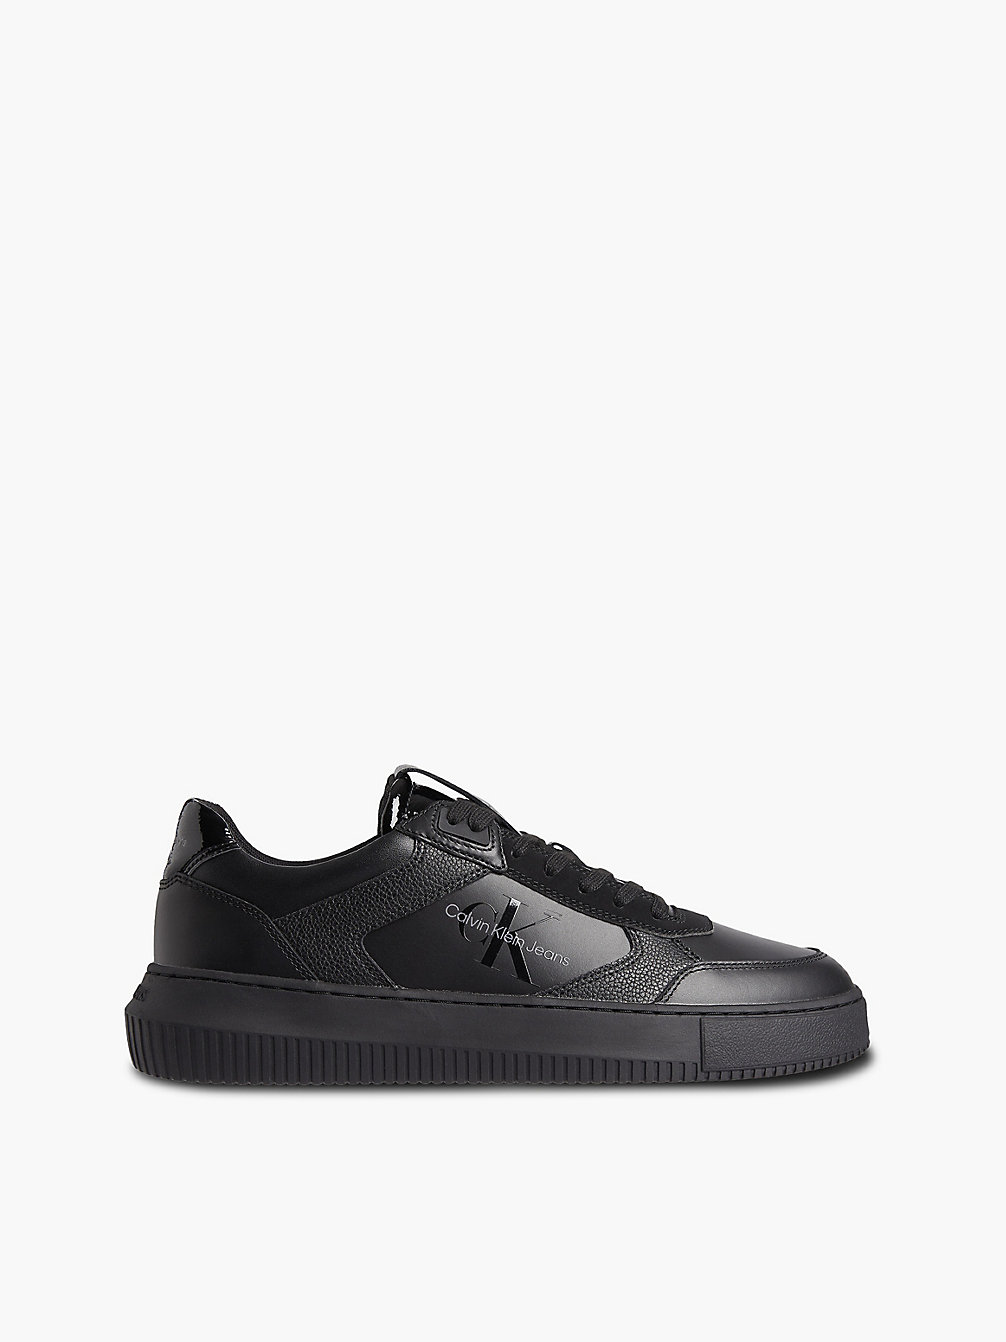 FULL BLACK Leather Trainers undefined men Calvin Klein